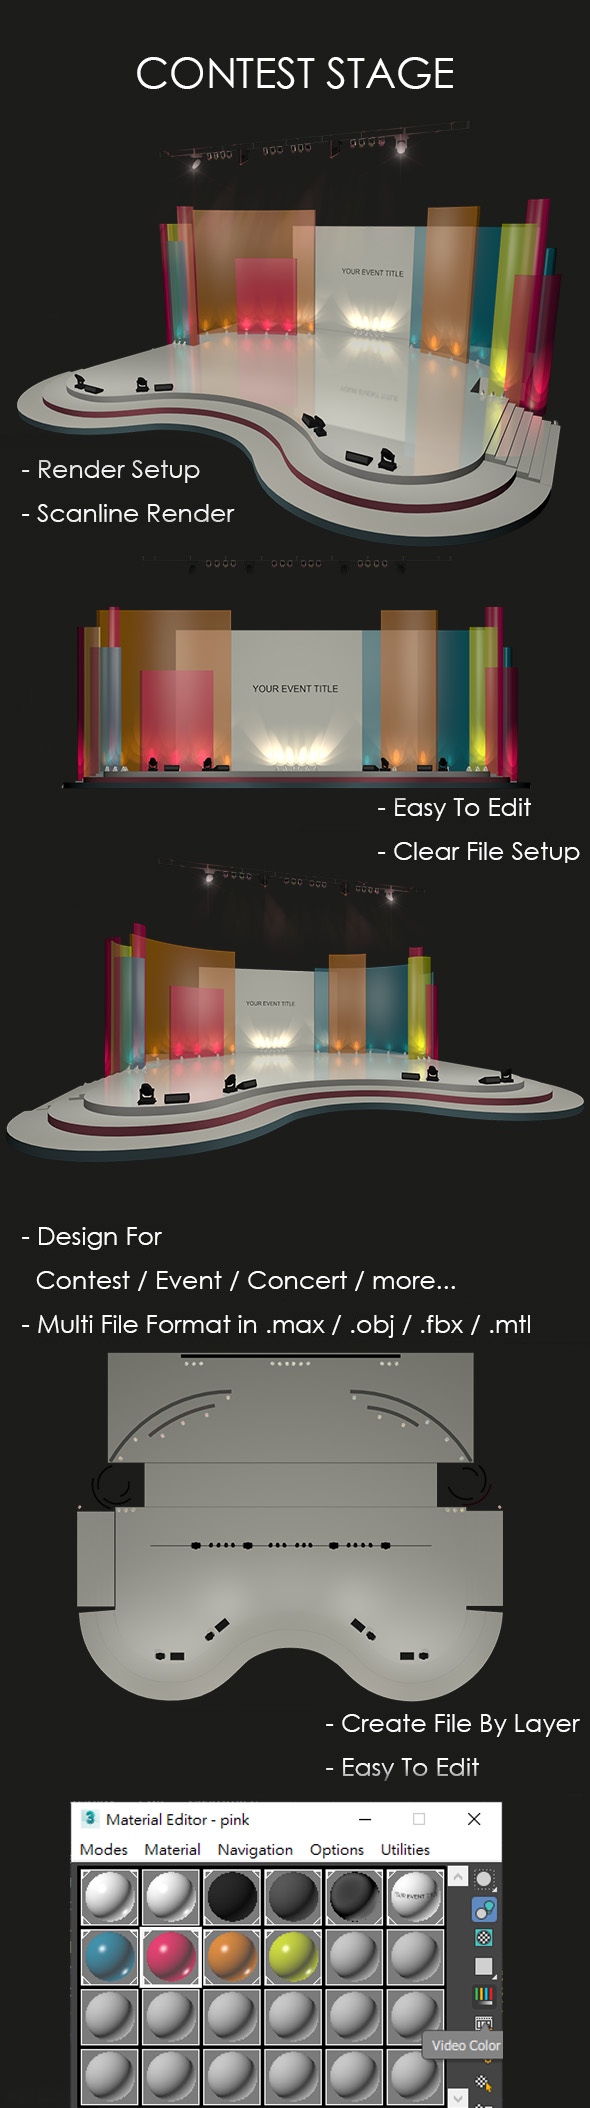 Contest Stage